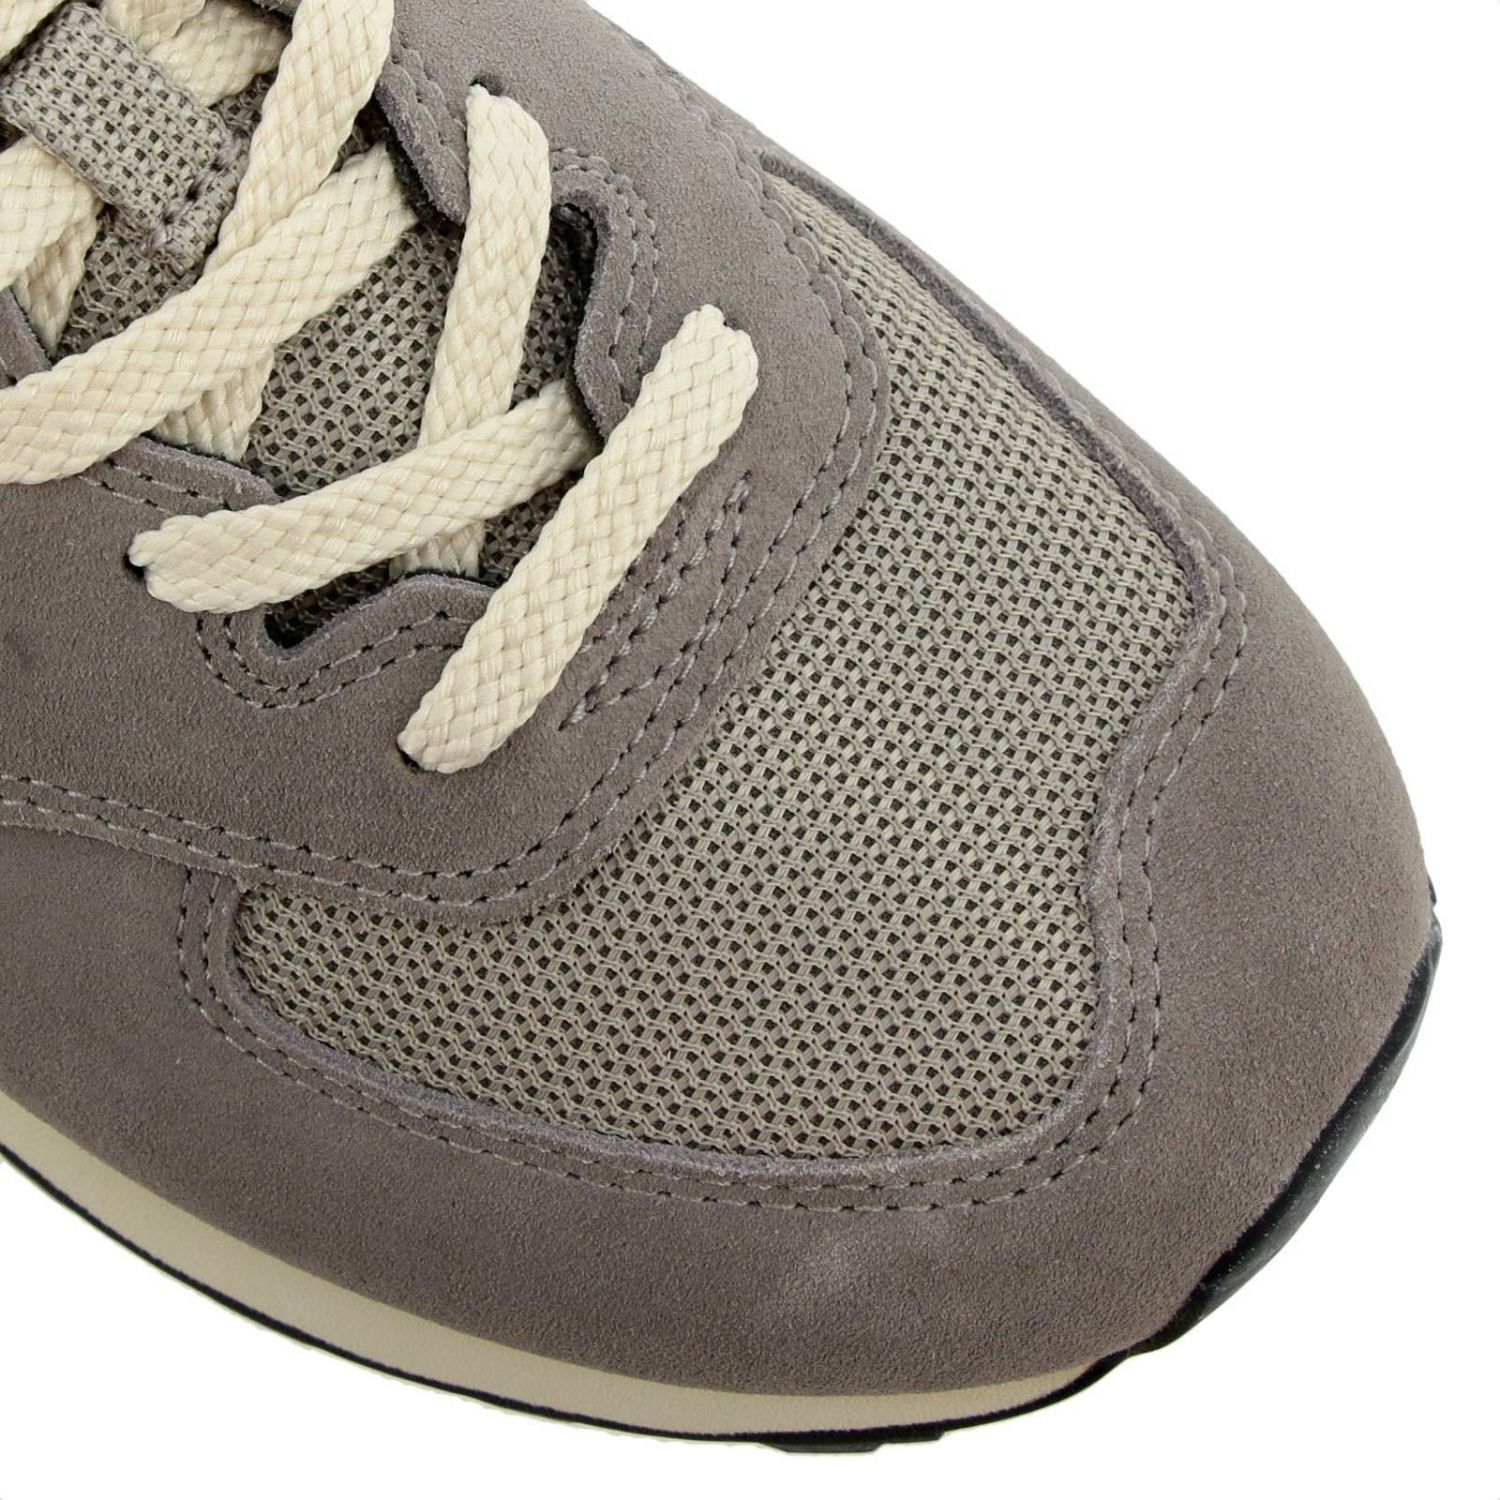 New Balance Outlet: Shoes men | Sneakers New Balance Men Grey ...